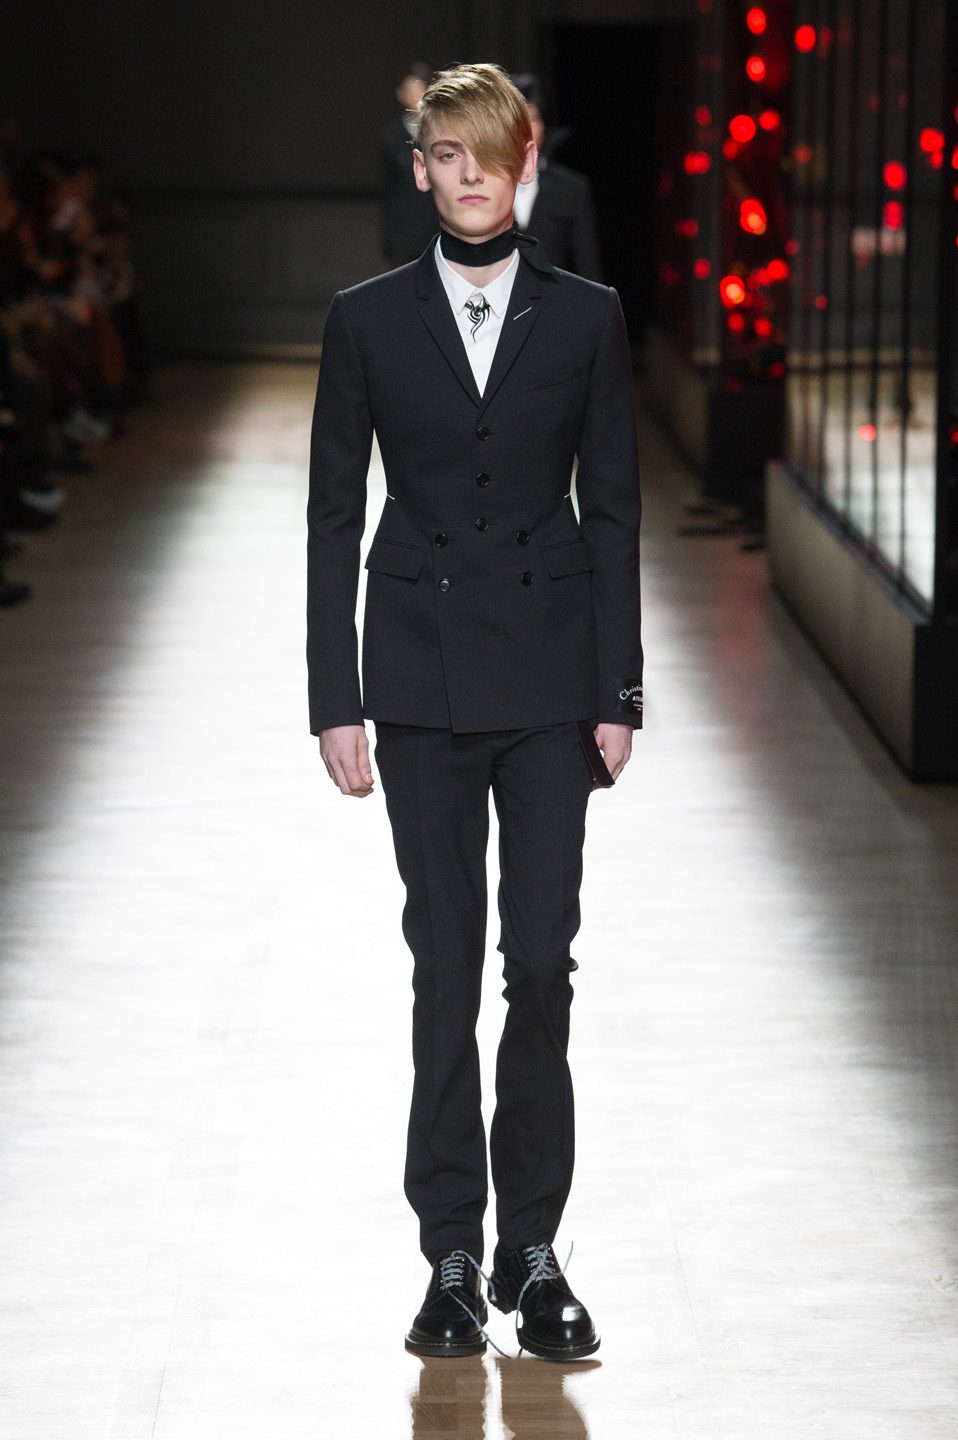 DIOR HOMME WINTER 18 19 BY PATRICE STABLE look02 Fall/WInter 2018 runway